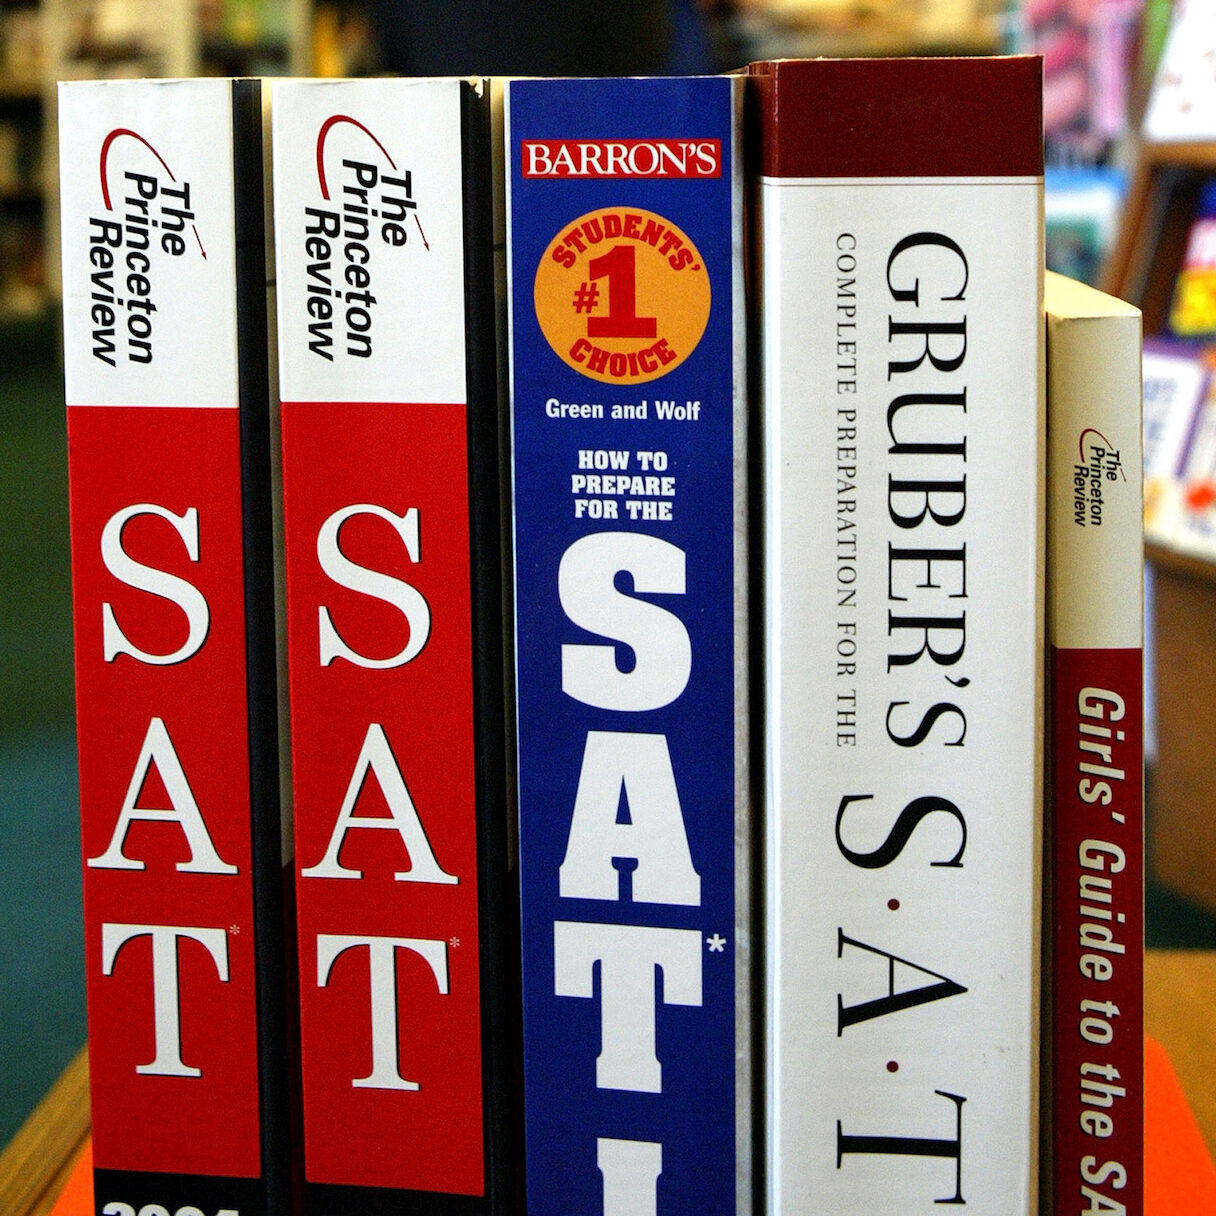 SAN FRANCISCO - AUGUST 26:  SAT preparation books are seen on a shelf at A Clean Well Lighted Place For Books bookstore August 26, 2003 in San Francisco. The College Board today reports significant gains in both SAT math and verbal average scores, with each rising three points from last year marking the highest level for math scores in more than 35 years, while verbal scores matched the level last reached in 1987. At the same time, more students took the SAT than ever before, which indicates a growing need and desire for higher education.  (Photo by Justin Sullivan/Getty Images)